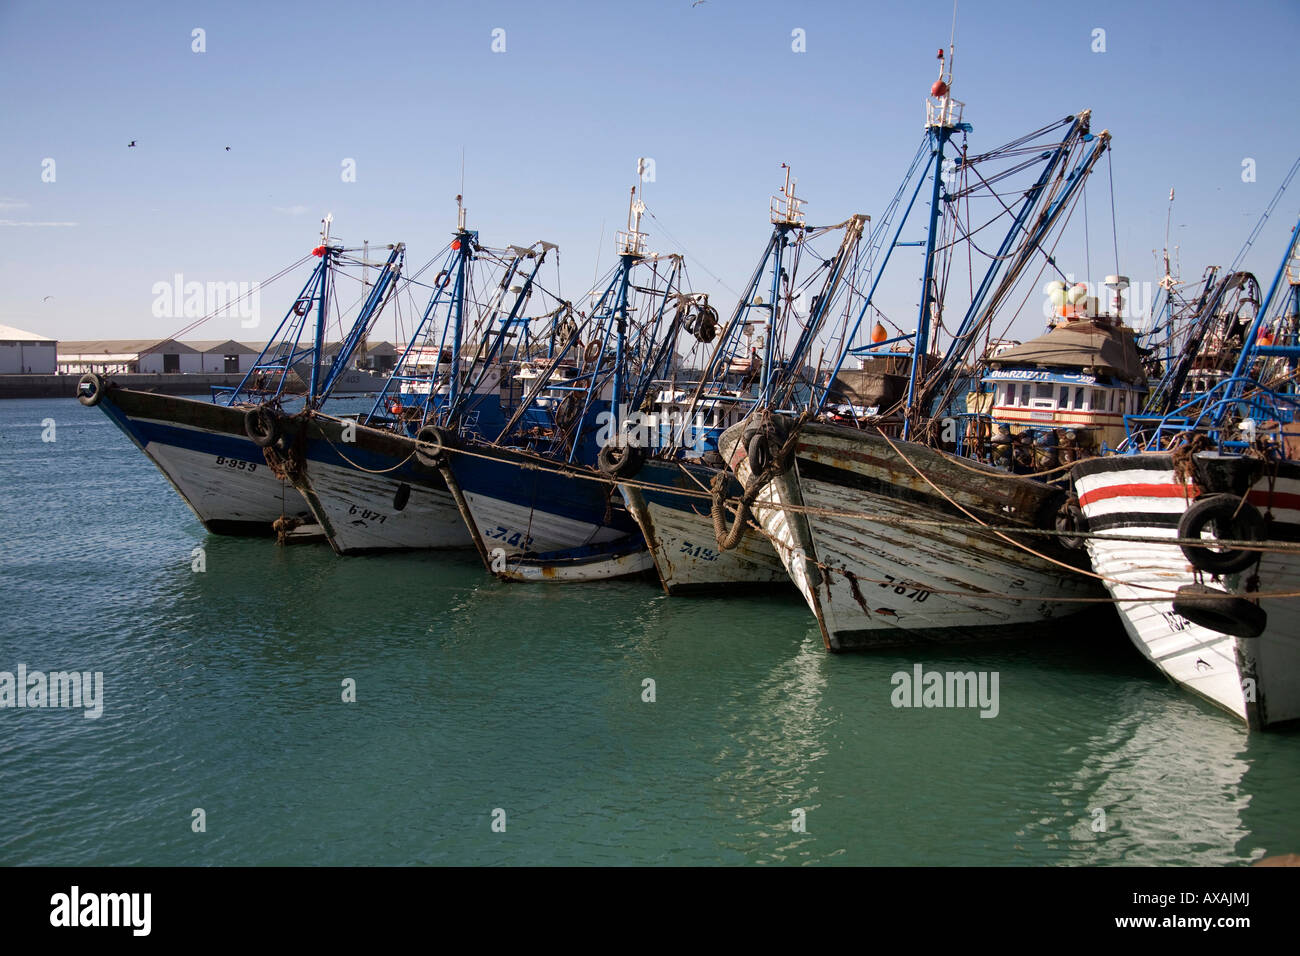 Agadir fishing port, Morocco, North West Africa. Blue Fishing boats in harbour. Petit Port de peche Stock Photo